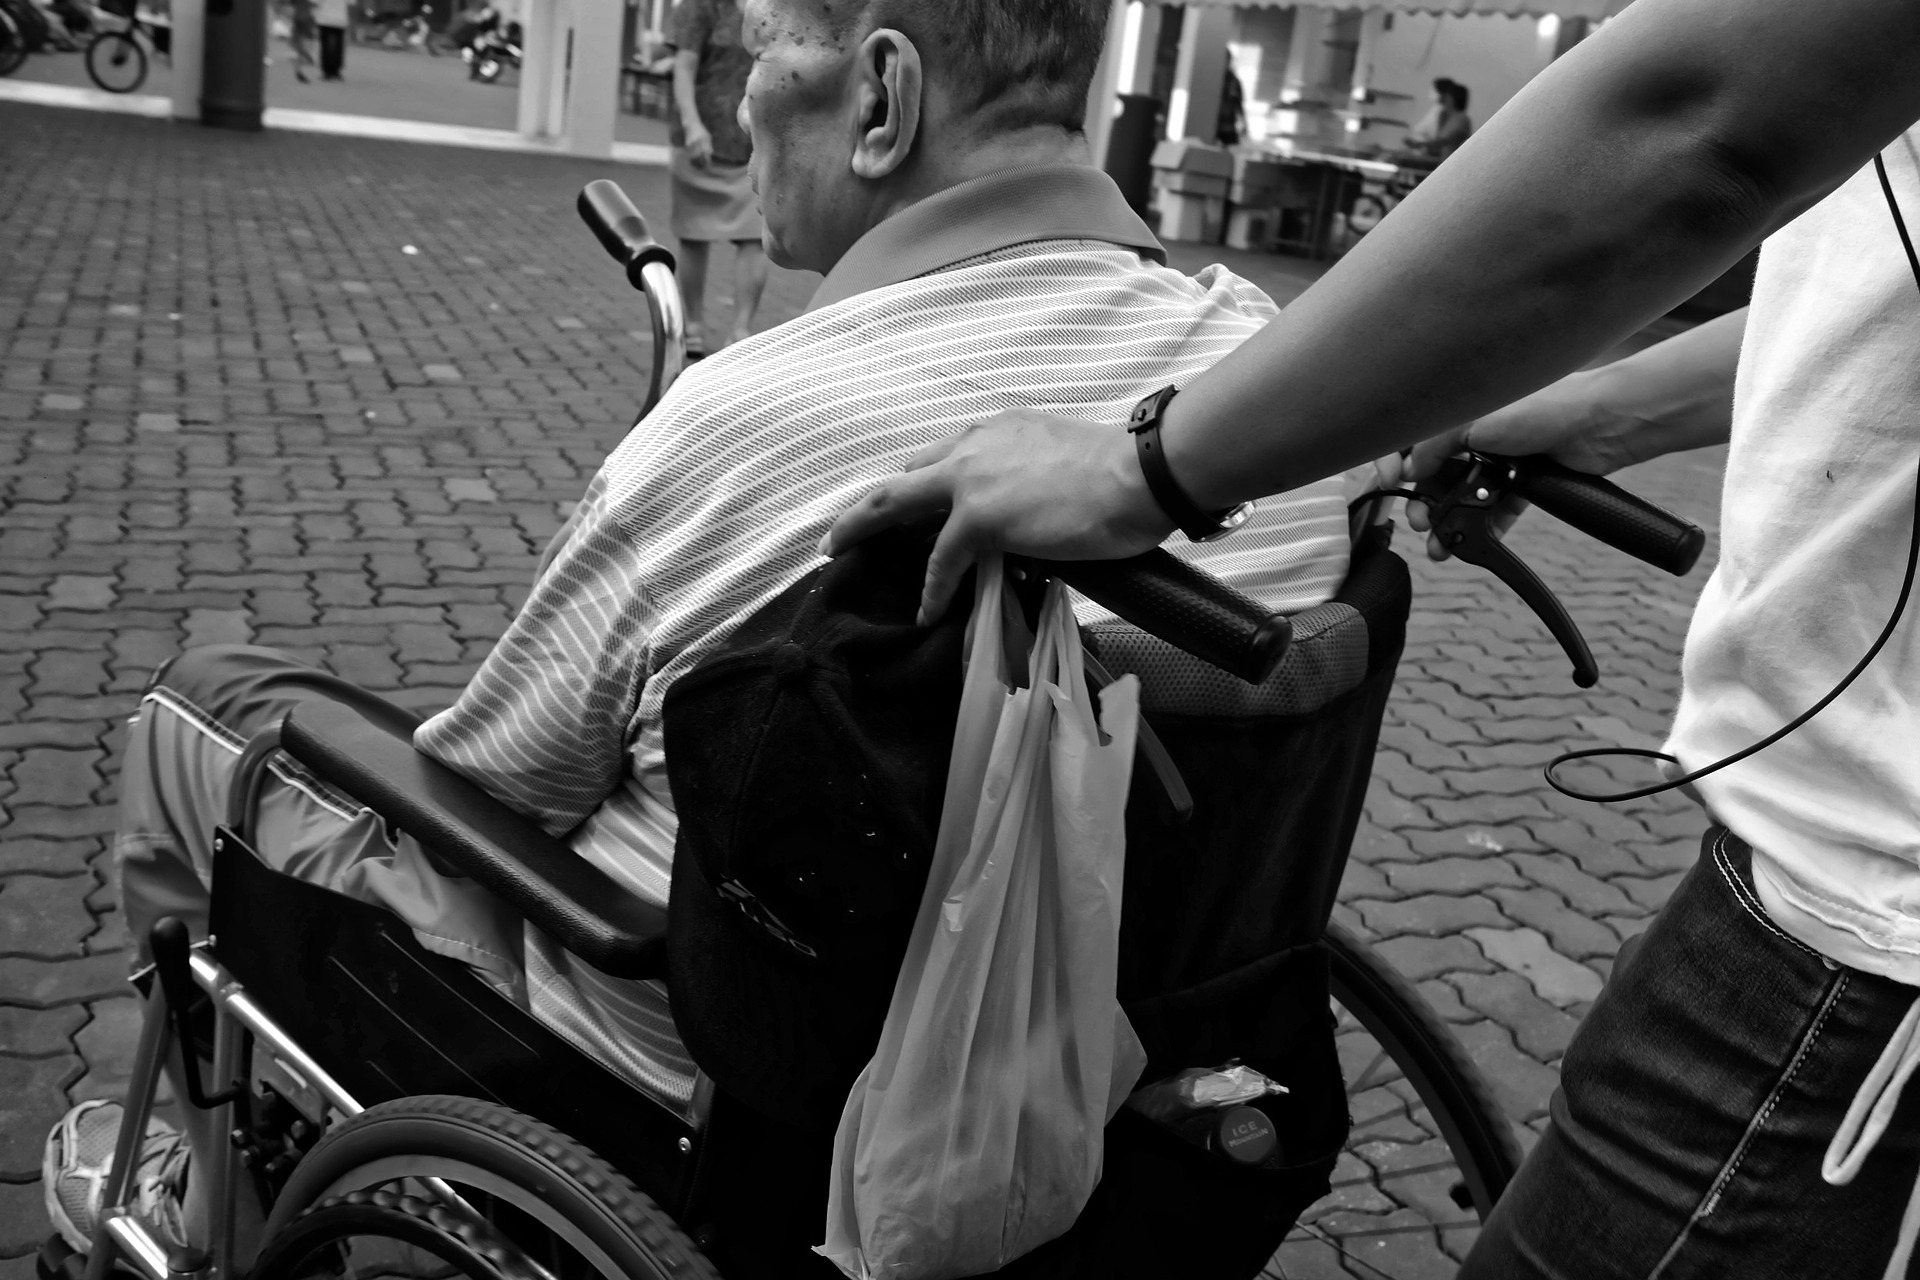 Elderly in a Wheelchair (Image by Kevin Phillips)